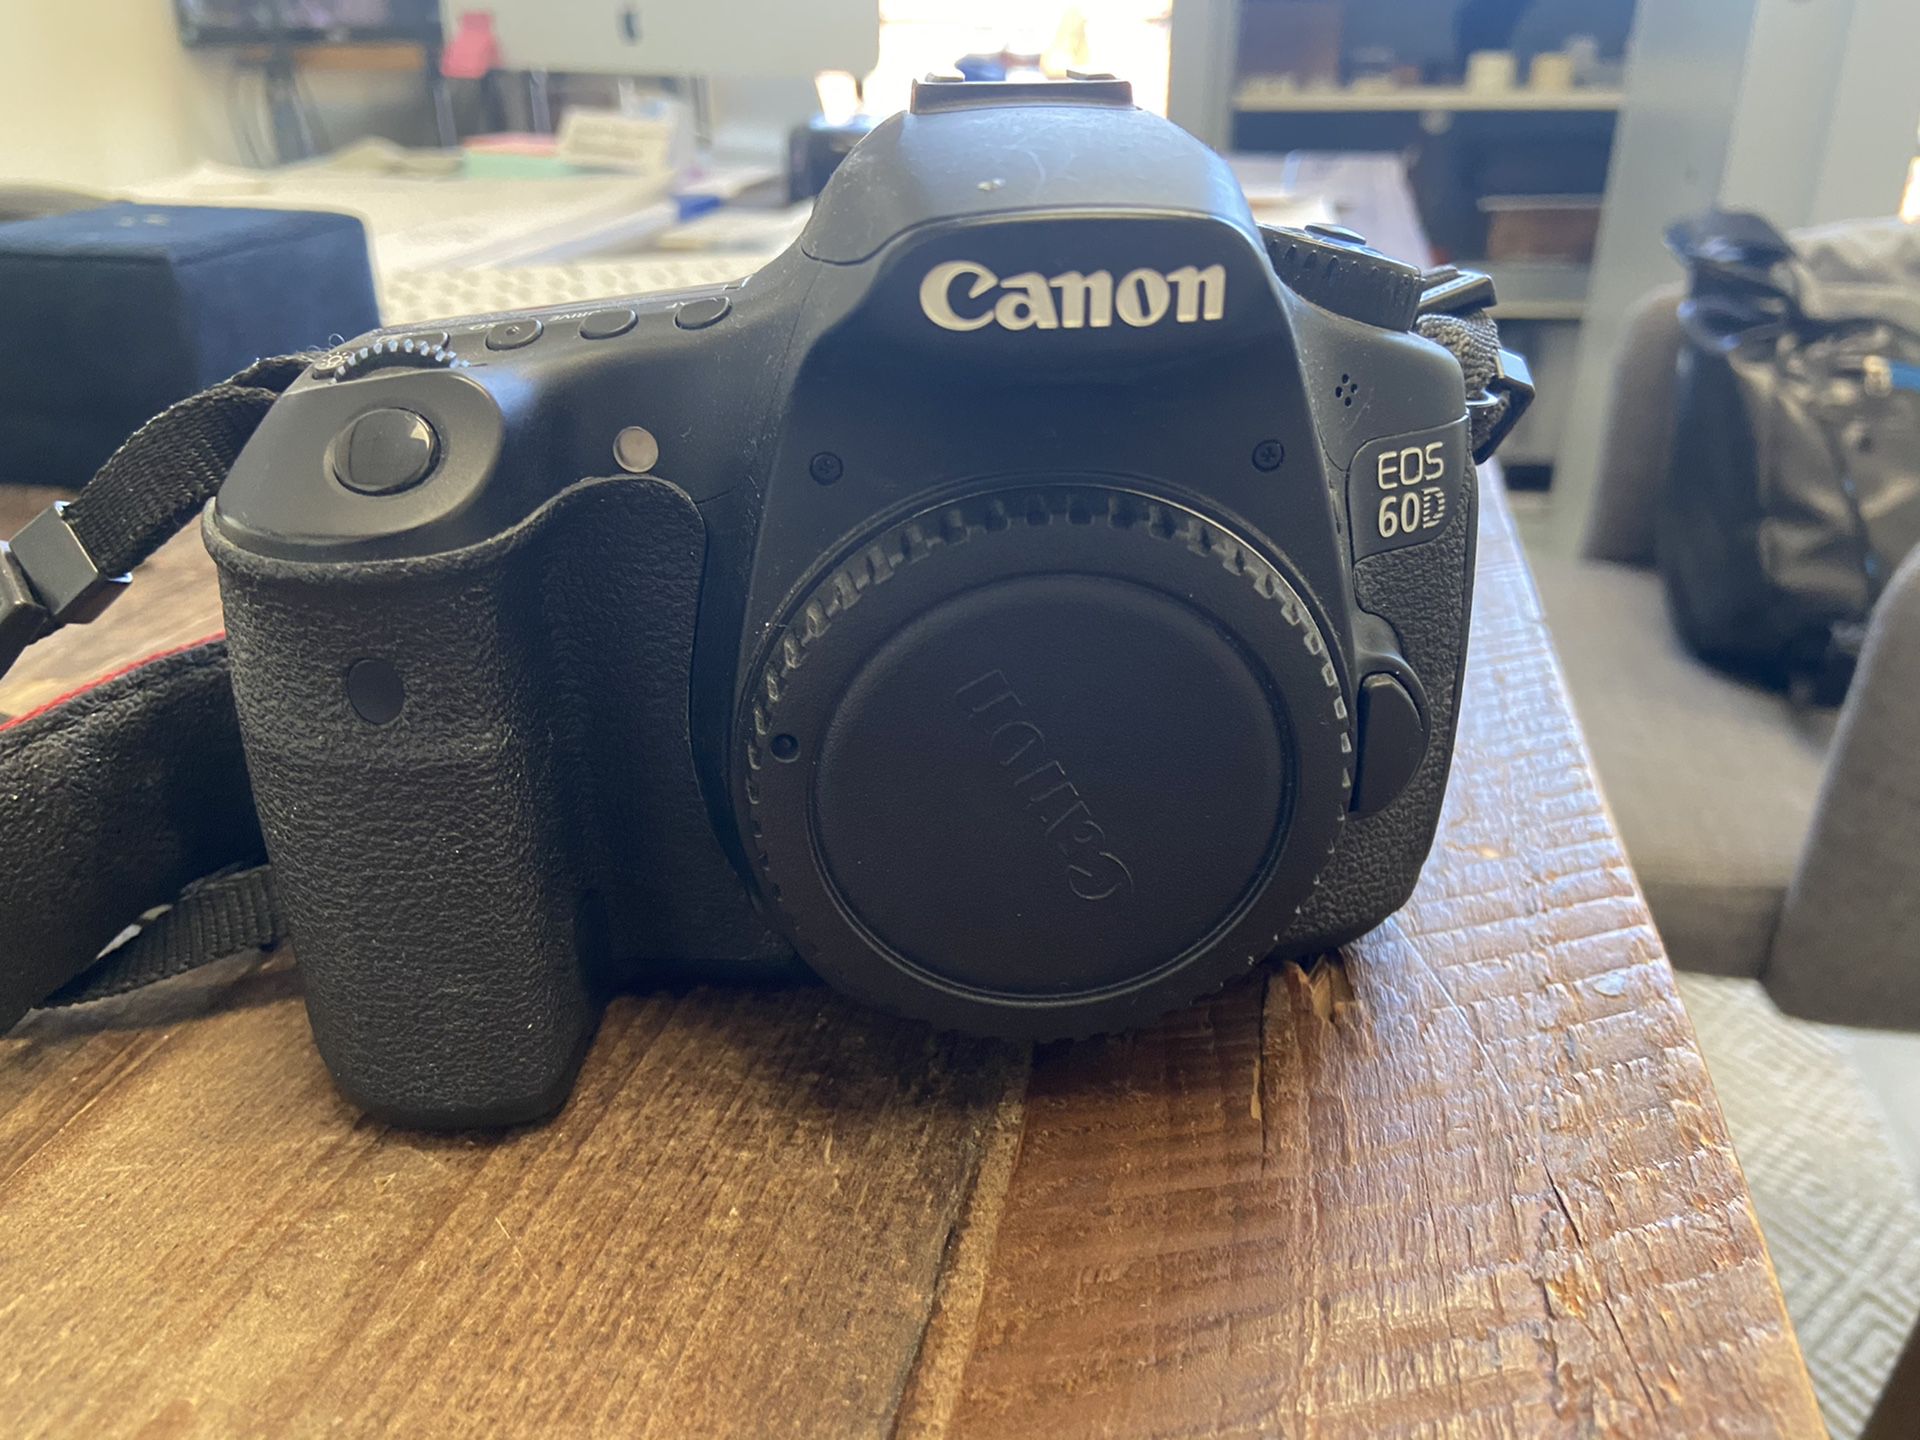 Canon 60d dslr camera not working/for parts